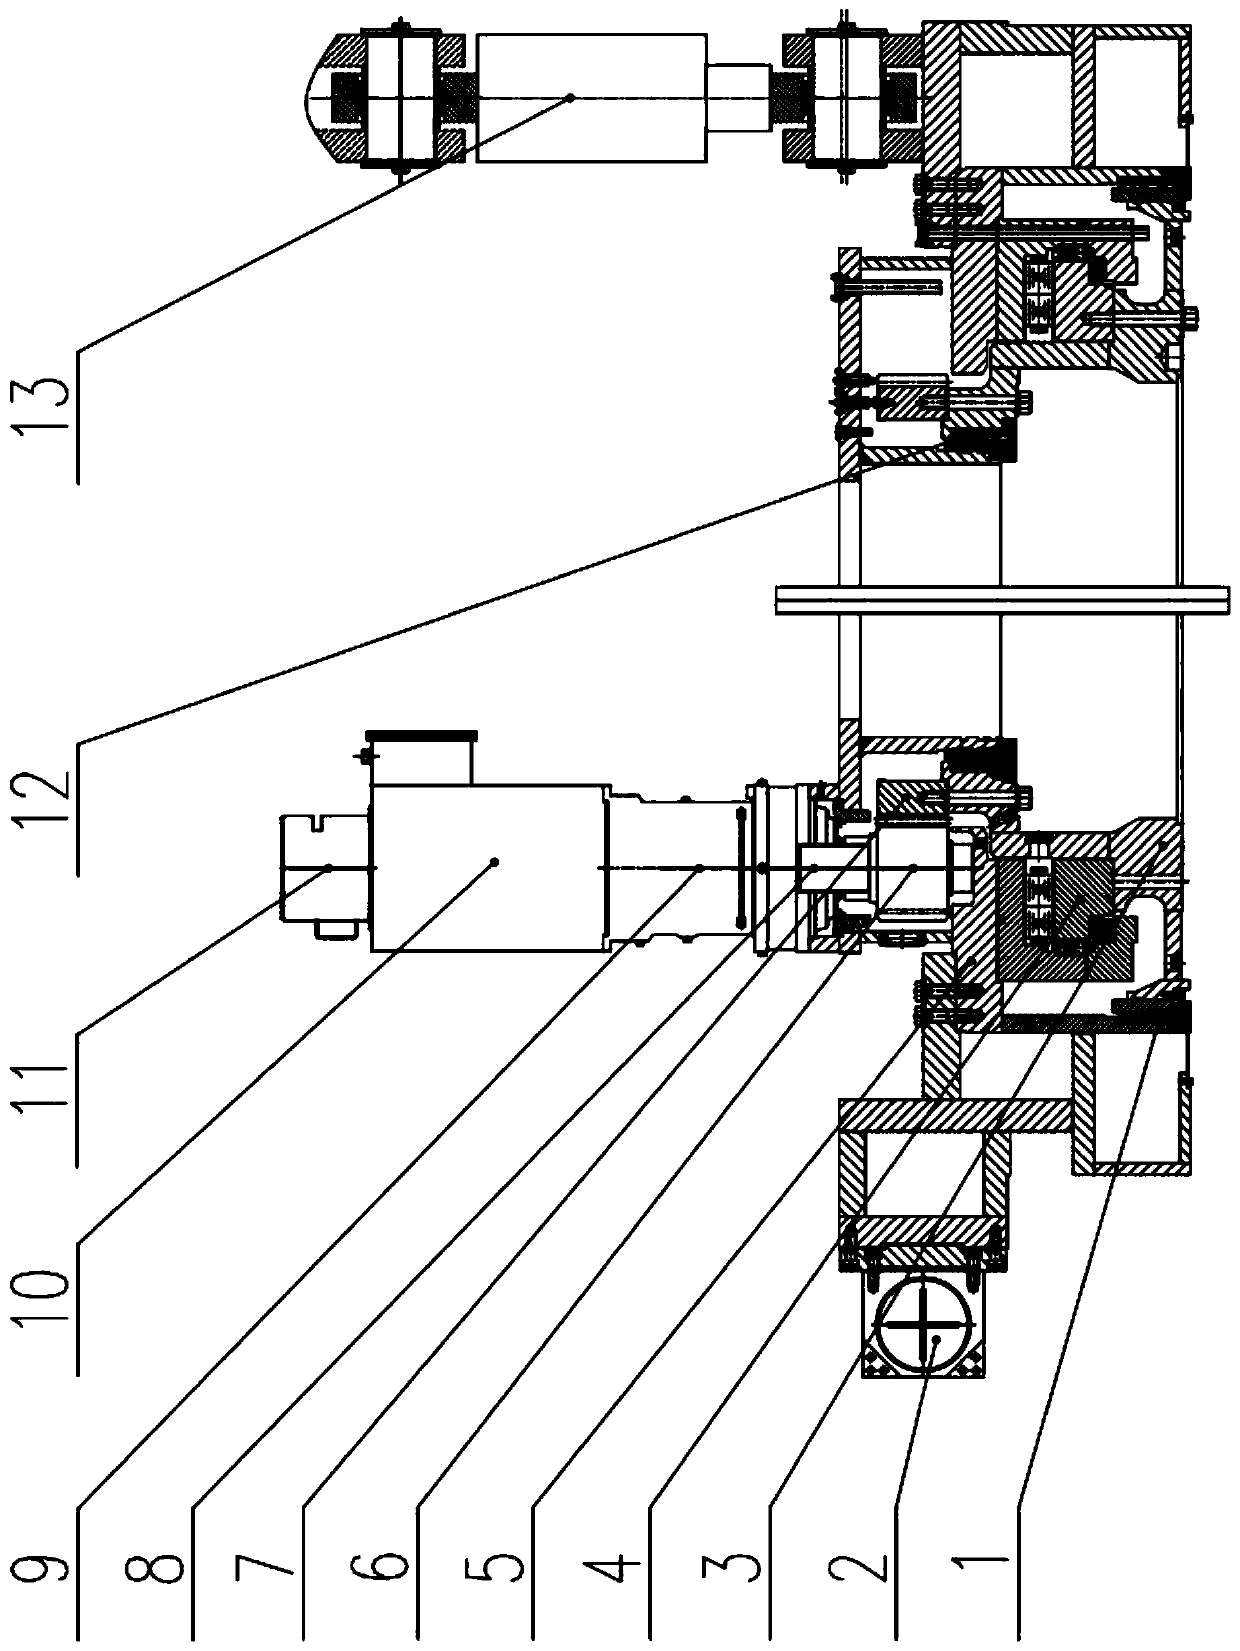 Main drive structure applied to super-large-diameter vertical shaft heading machine